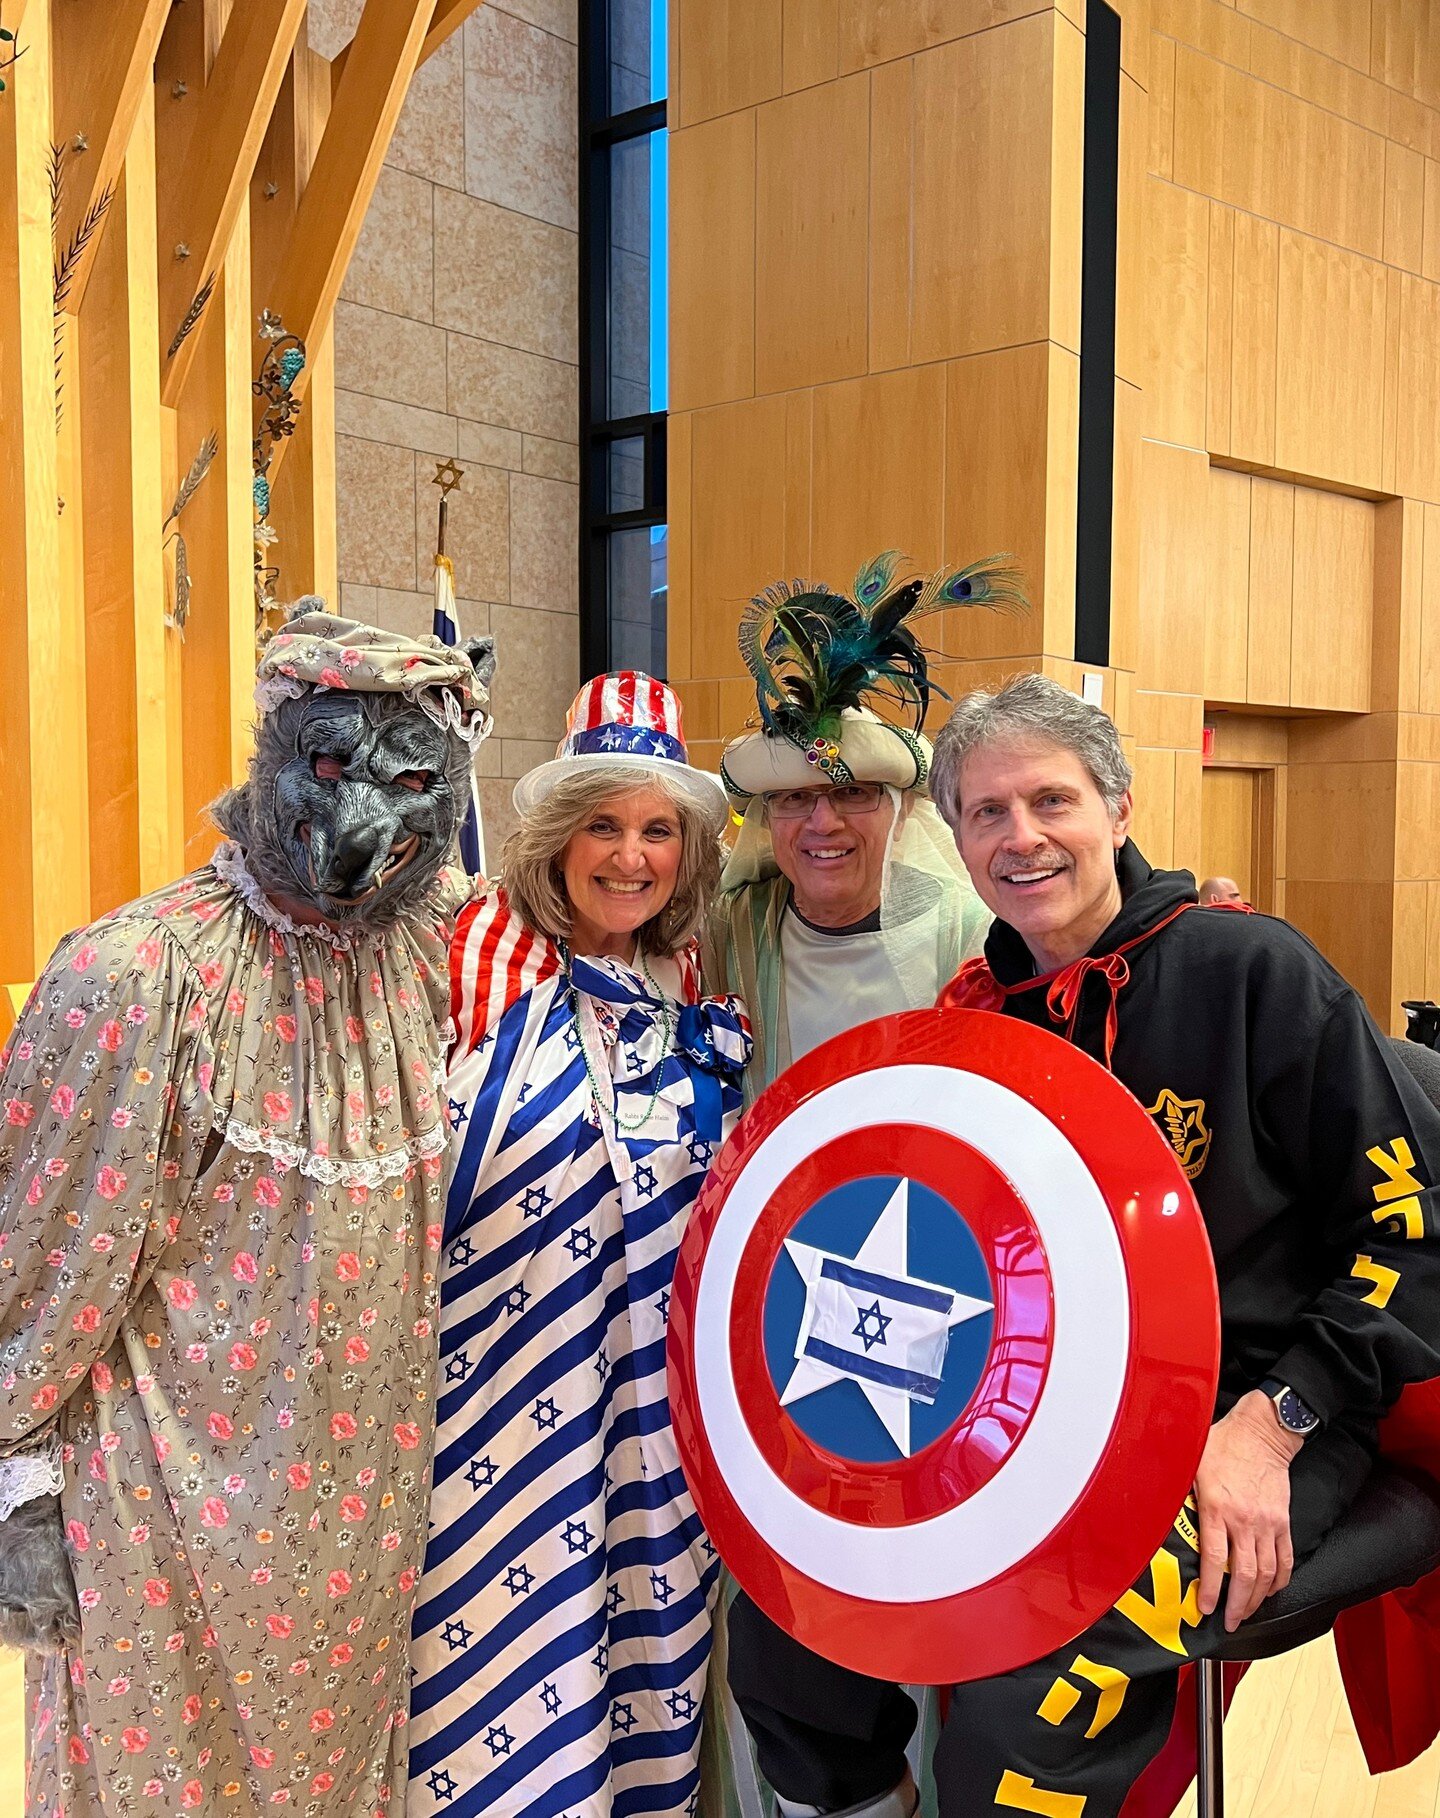 Purim Evening - Lights! Camera! Action! We released our inner movie stars and big screen heroes! We were bursting at the seams with over 300 people. This past saturday our congregation really celebrated in a big way with dancing, singing and costumes